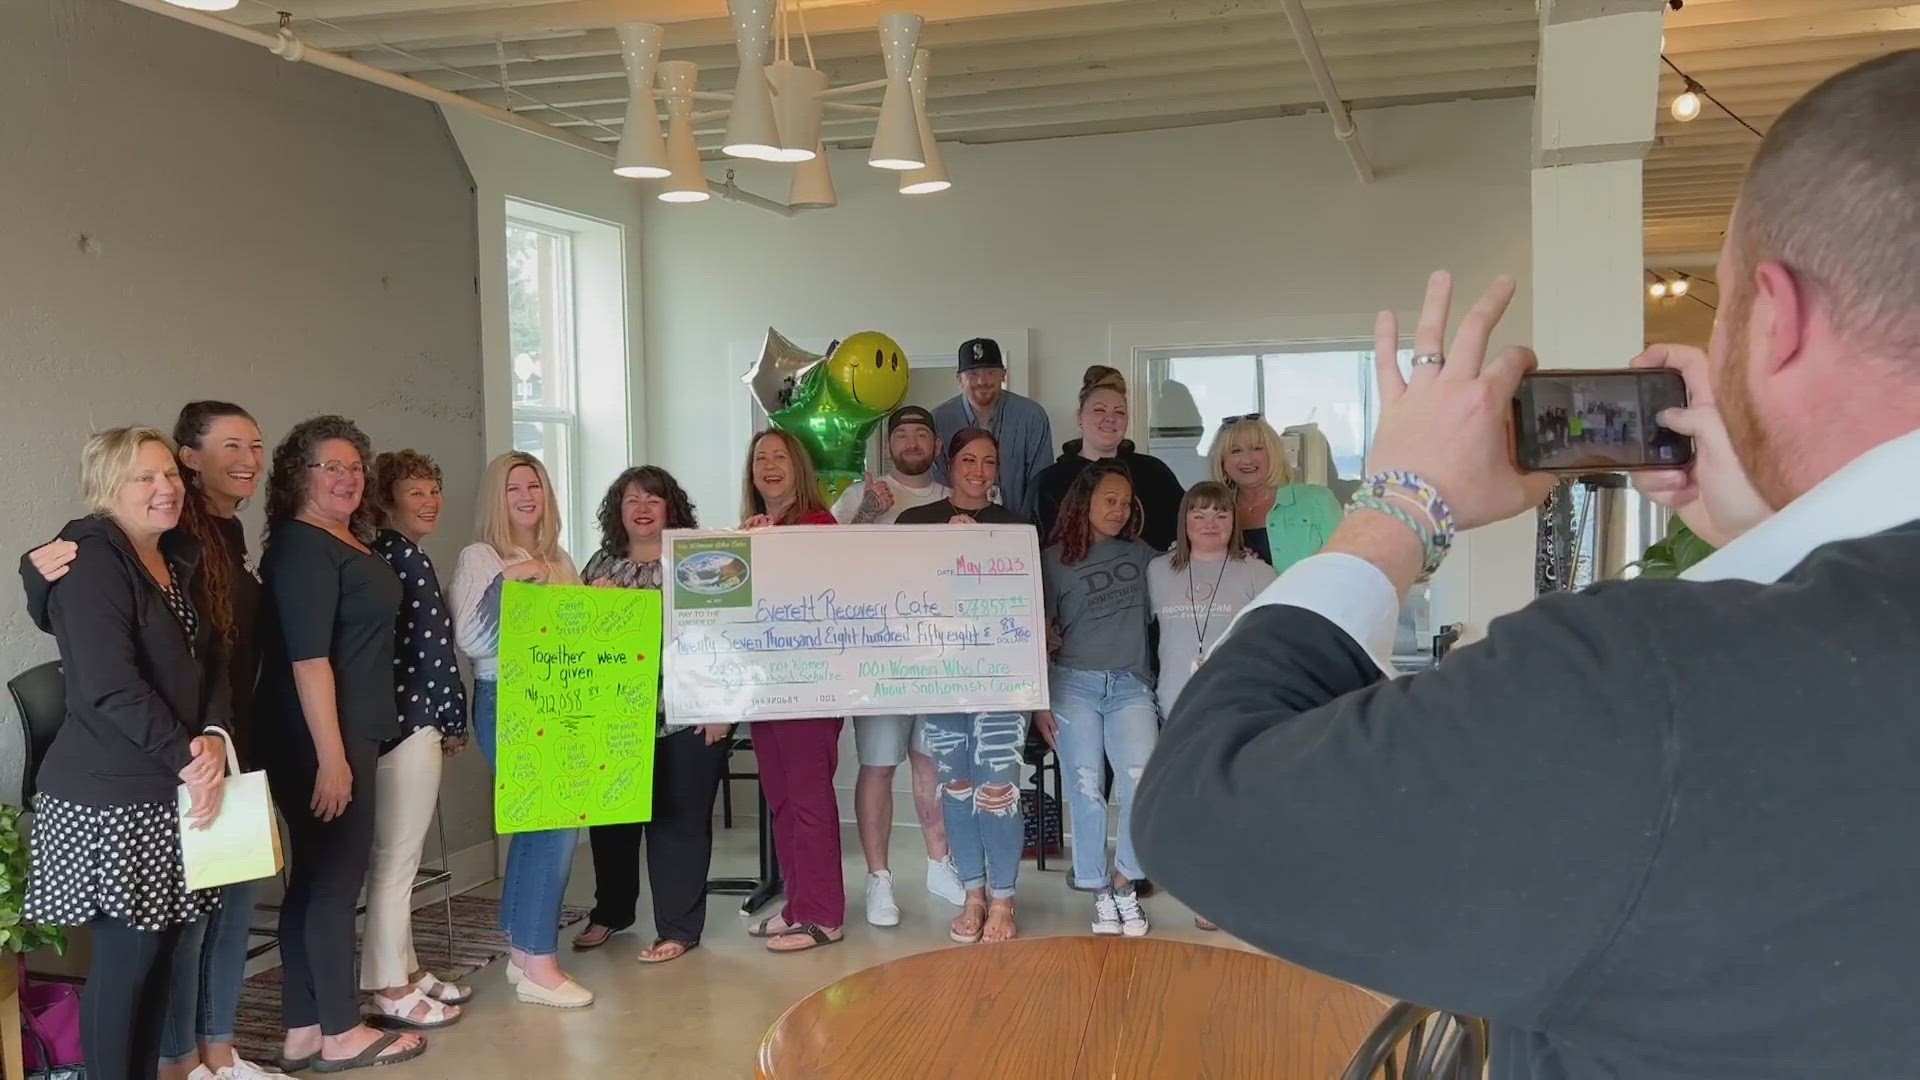 The group 100 Women Who Care just gave their biggest-ever donation of over $27,000 to Everett's Recovery Cafe.